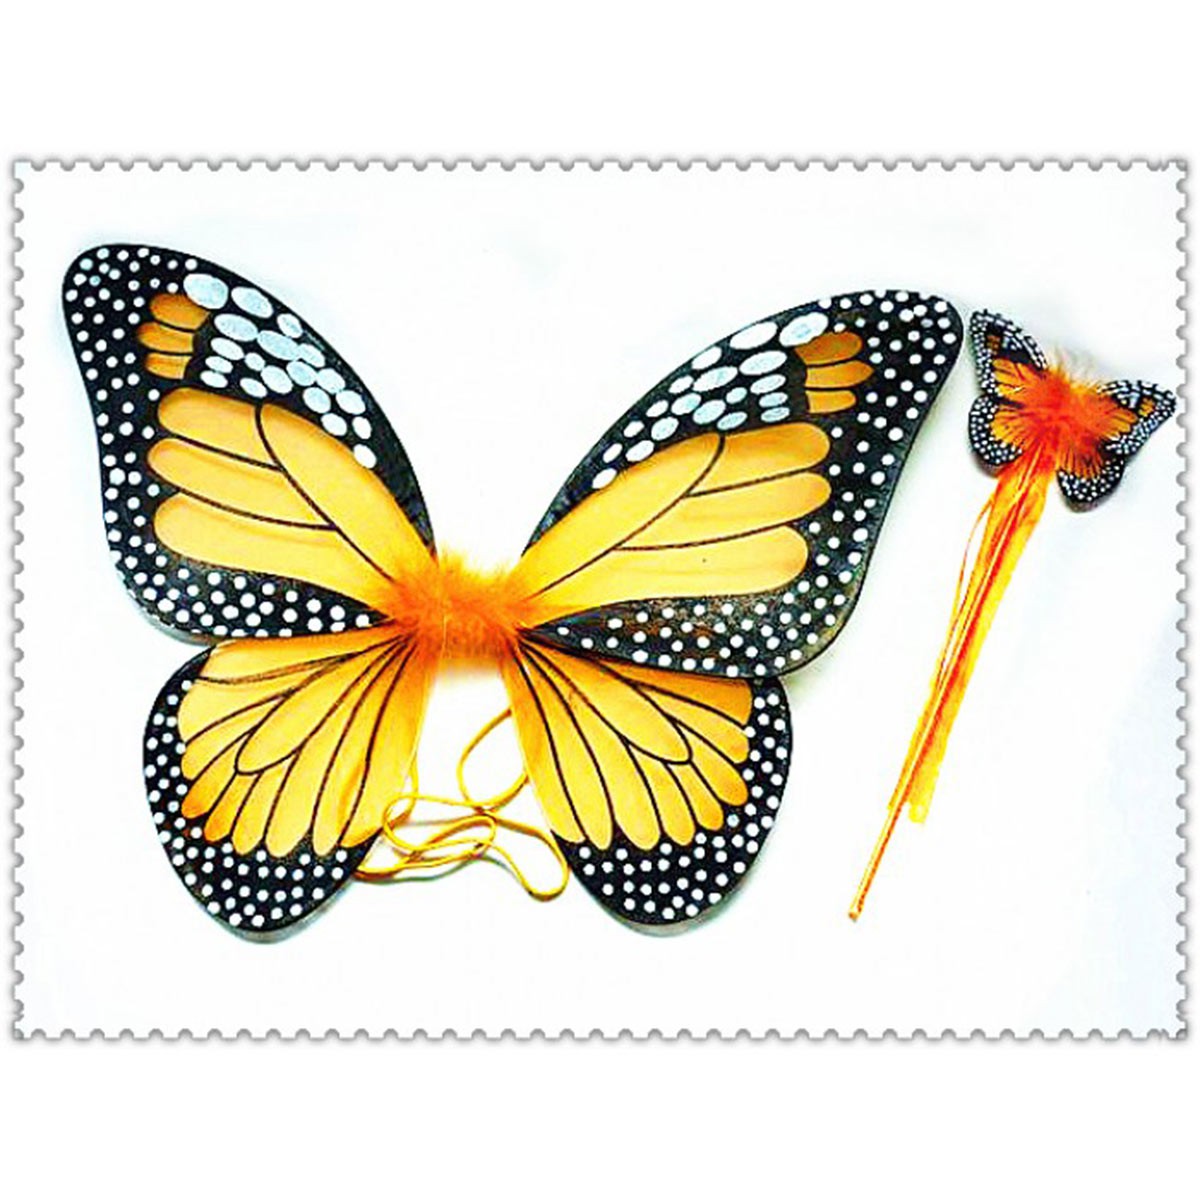 IVY TRADING INC. Costume Accessories Yellow Butterfly Wings and Wand for Adults 8336572232344